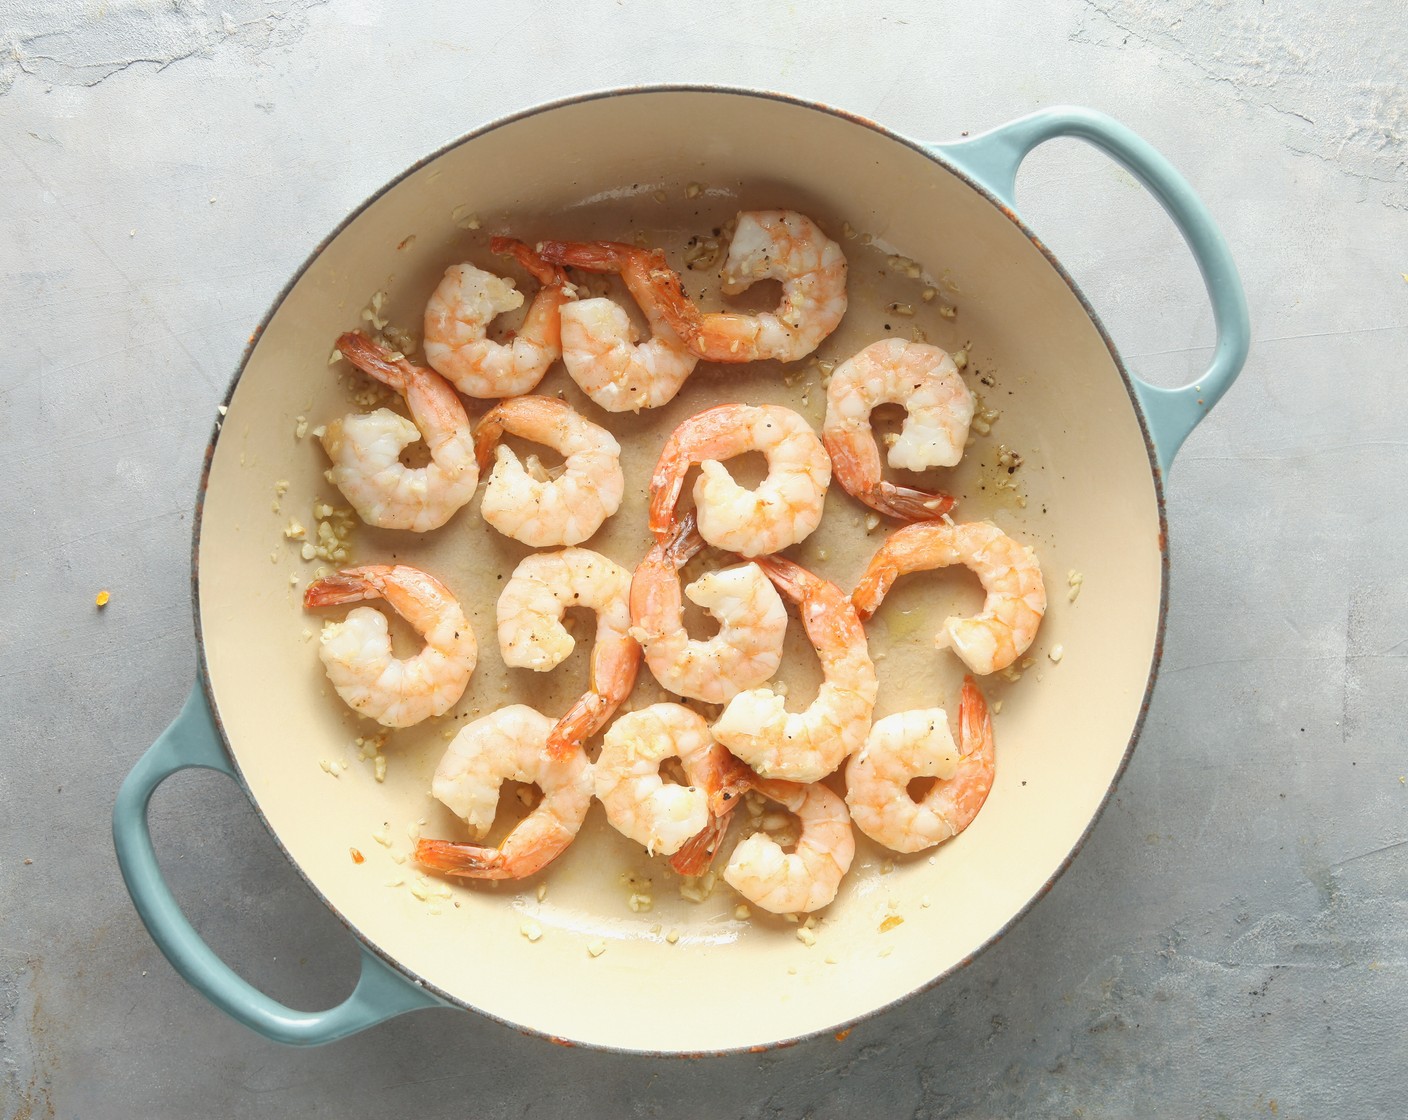 step 1 Heat the Olive Oil (2 Tbsp) in a large pan over medium-high heat. When the oil is shimmering, add the Garlic (6 cloves) and Medium Raw Peeled Deveined Tail-On Shrimp (1 bag). Cook, covered, for 4-5 minutes, or until cooked through. Transfer the shrimp to a plate.